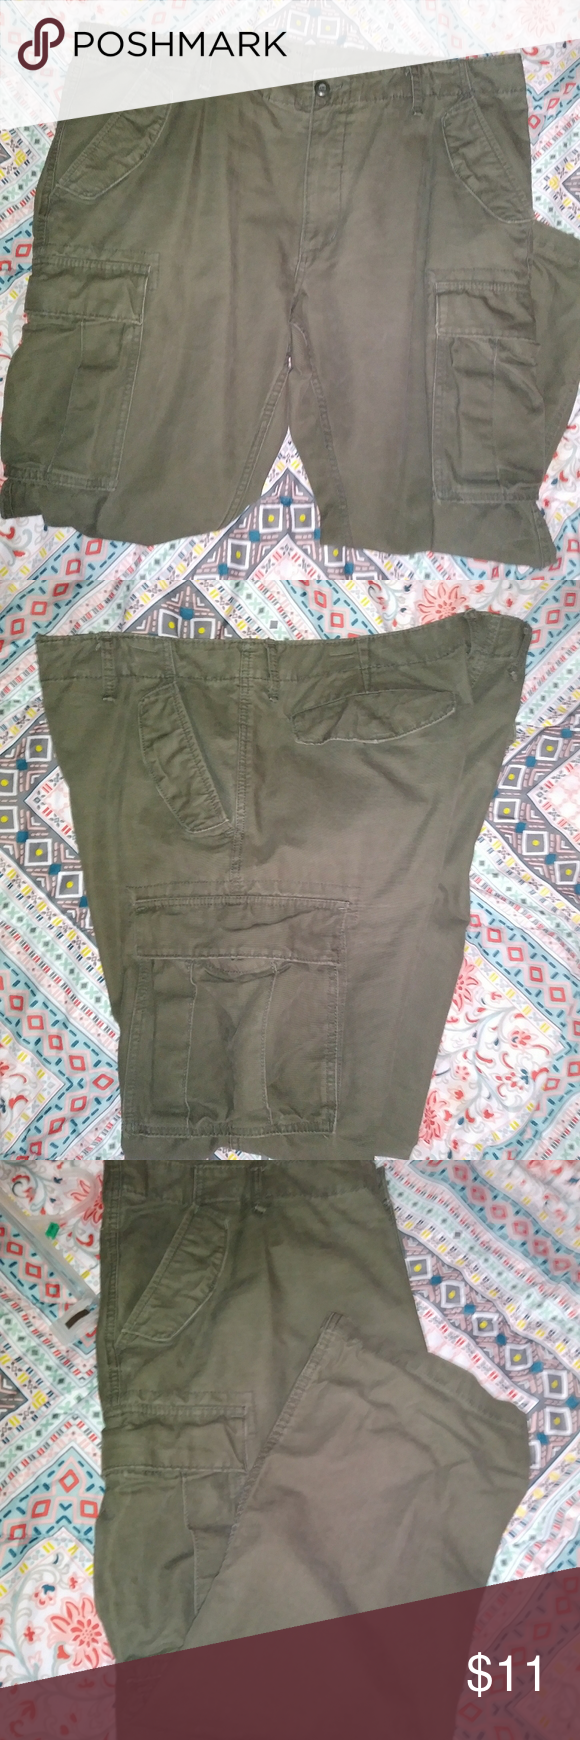 Old Navy Cargo pants Men’s size 42×30 Old Navy Cargo pants. USED and in Excelle…